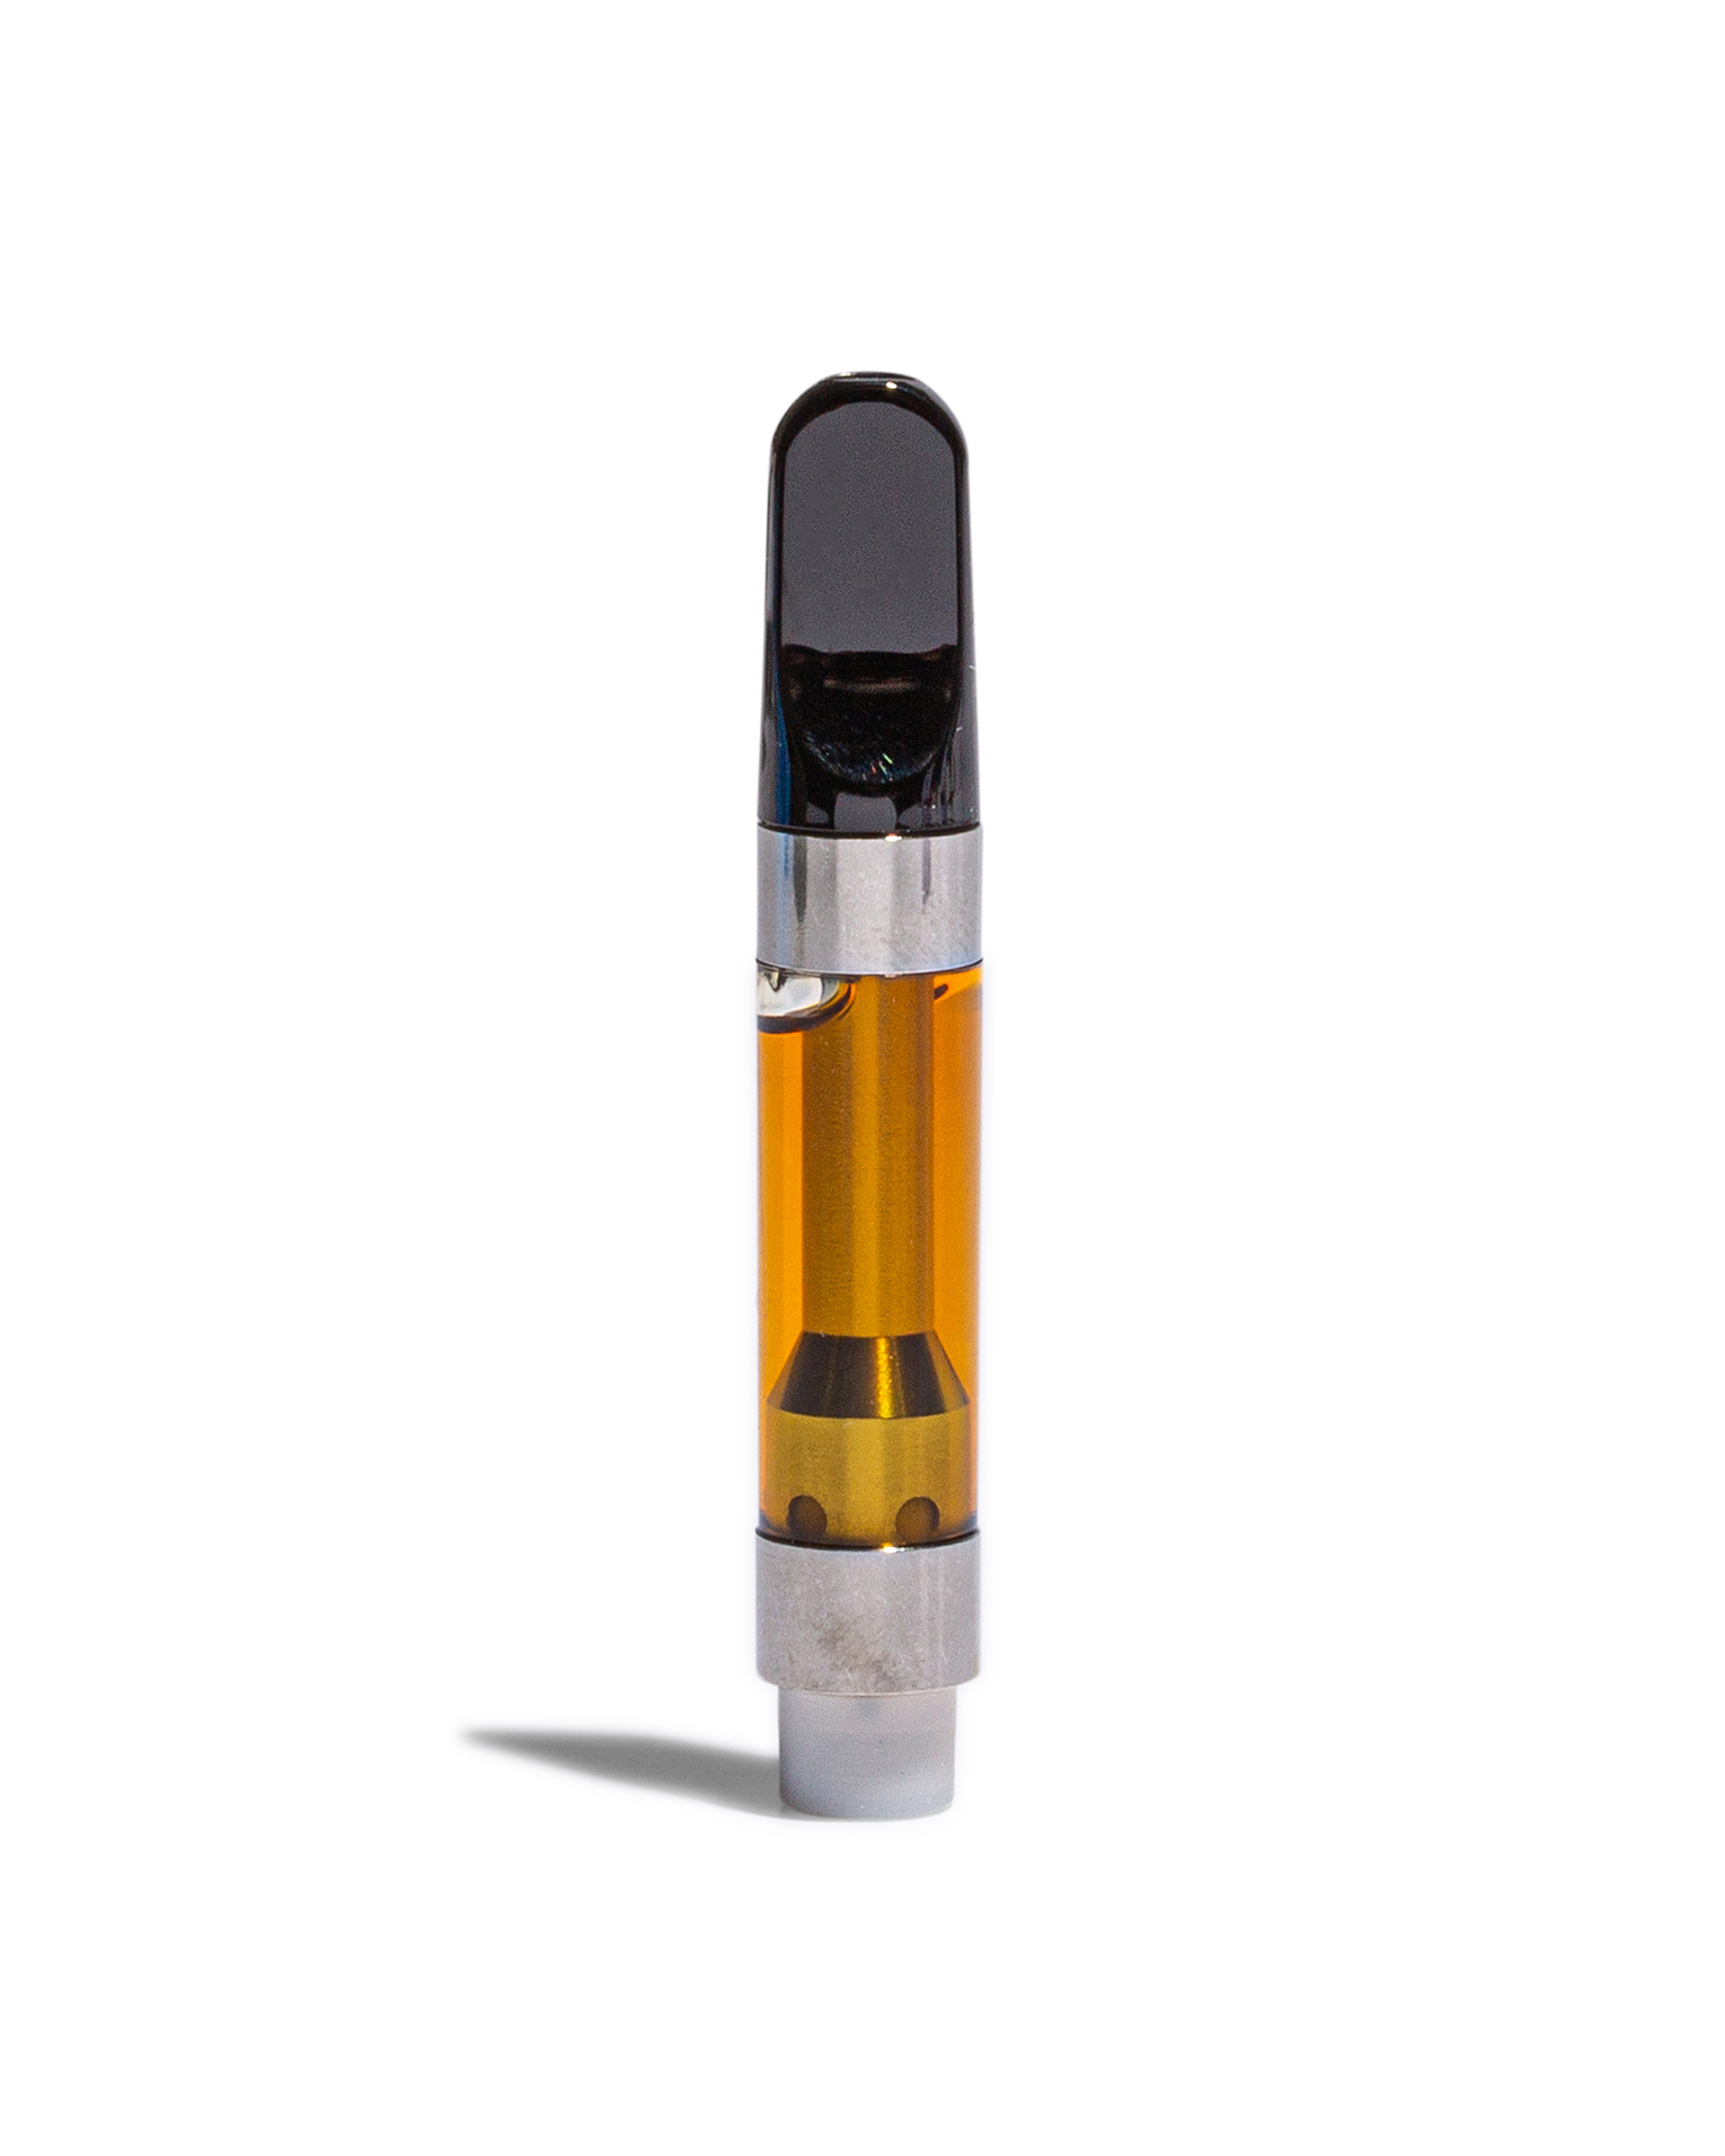 Spiked Punch Live Resin Cart 1g